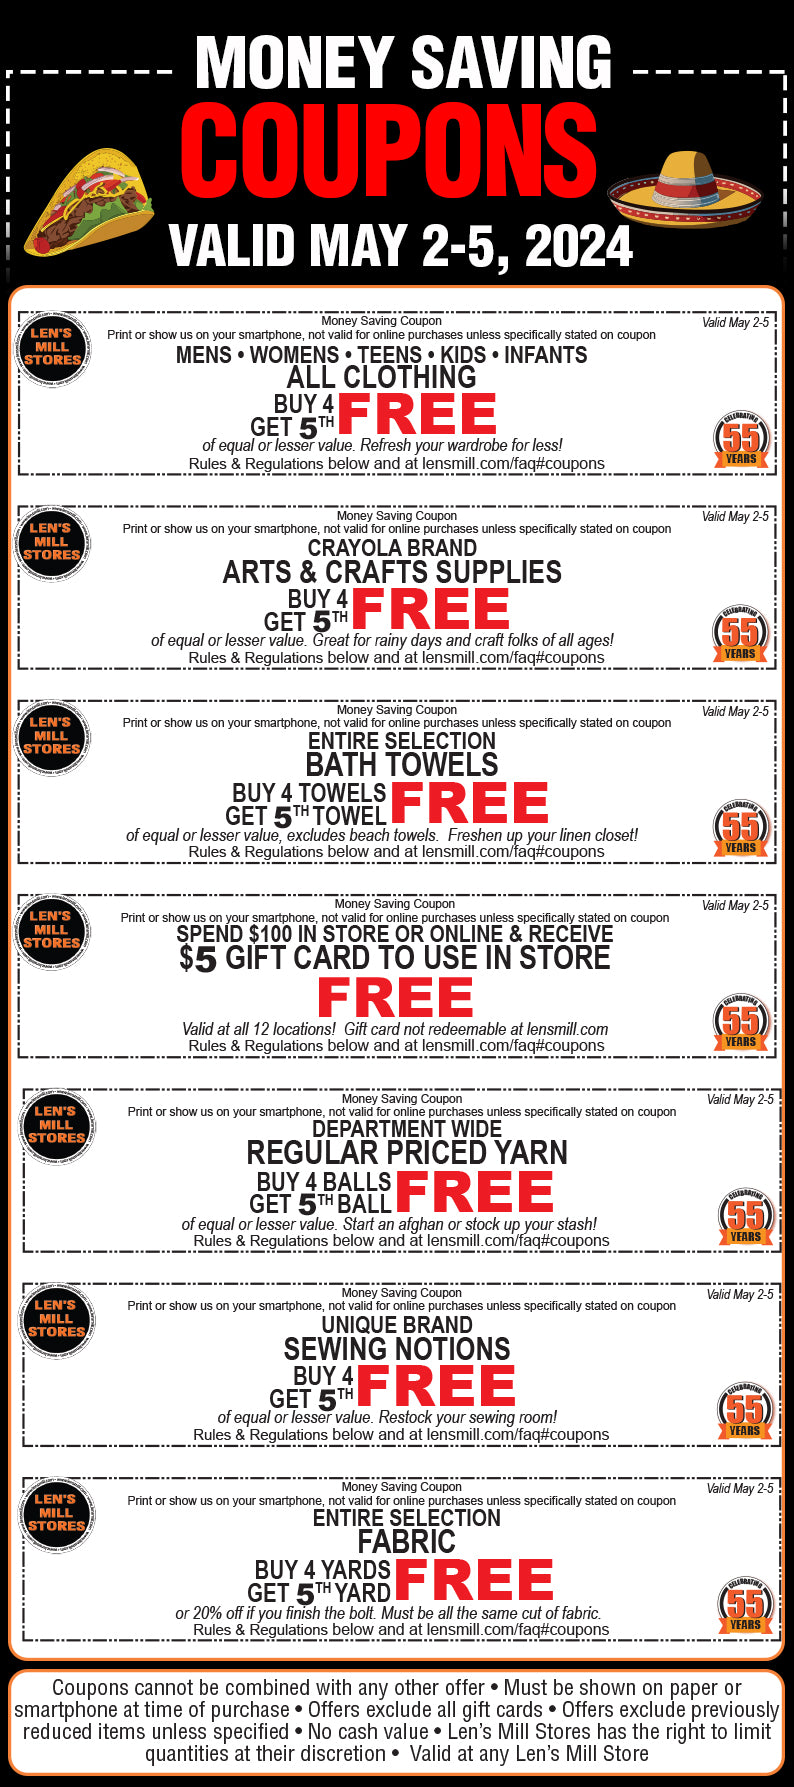 Valid May 2-5. Coupons are: All clothing buy 4 get 5th free; Crayola brand arts and crafts supplies buy 4 get 5th free; all bath towels buy 4 get 5th free, excludes beach towels; spend $100 in store or online and receive $5 gift card to use in store free; regular priced yarn buy 4 get 5th free; Unique brand sewing notions buy 4 get 5th free; all fabric buy 4 yards get 5th free or 20% off if you finish the bolt, must all be the same cut of fabric.